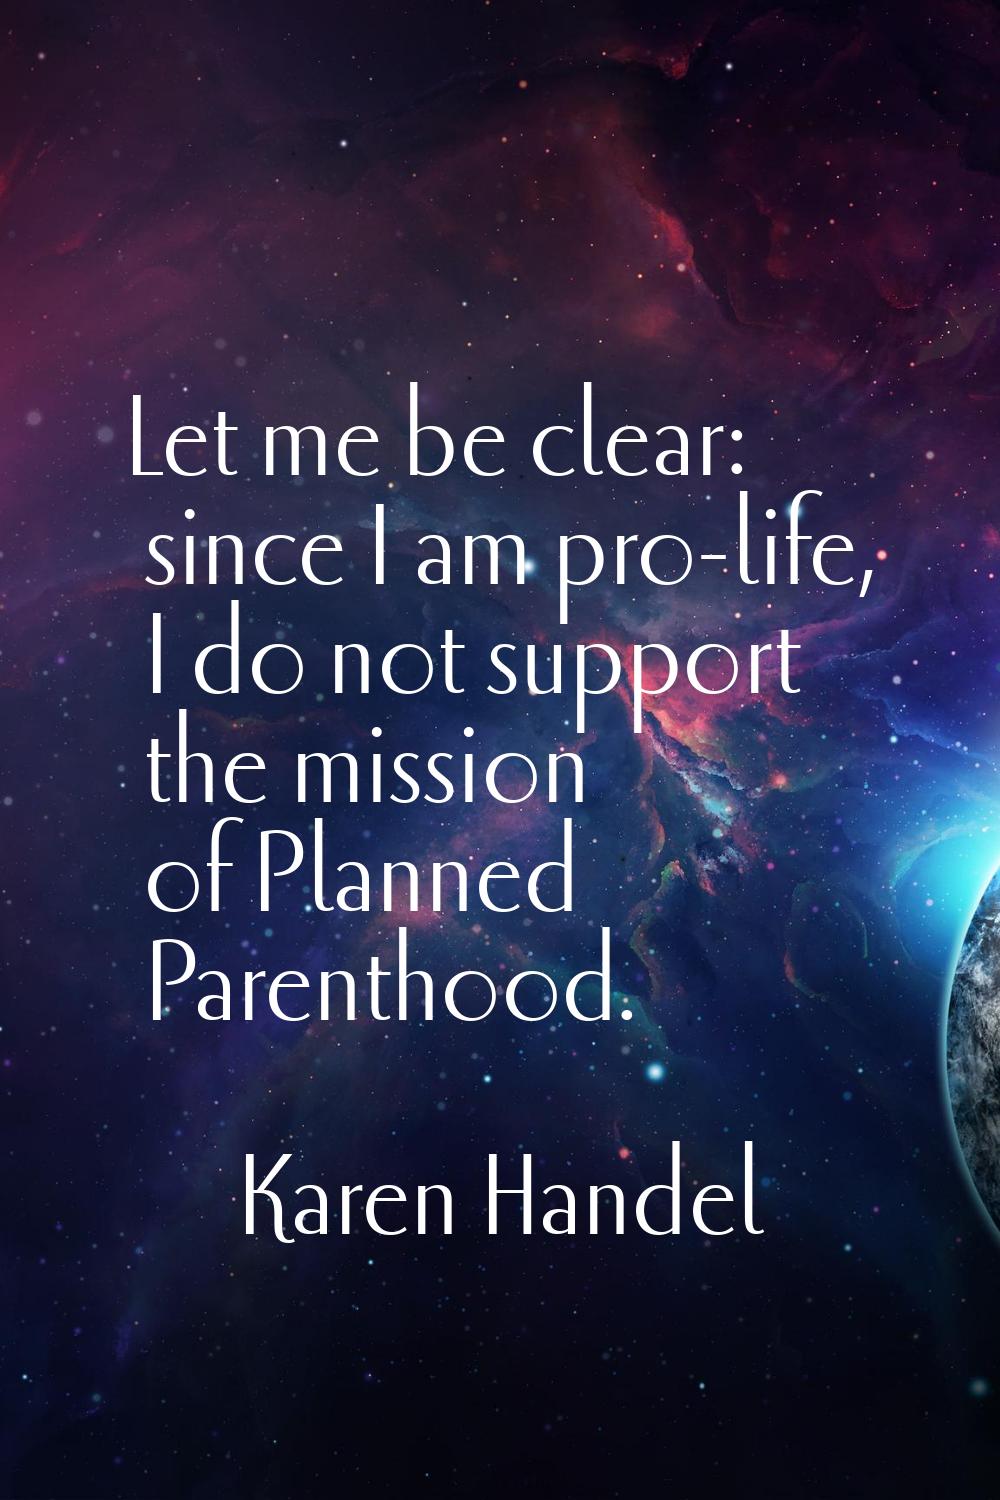 Let me be clear: since I am pro-life, I do not support the mission of Planned Parenthood.